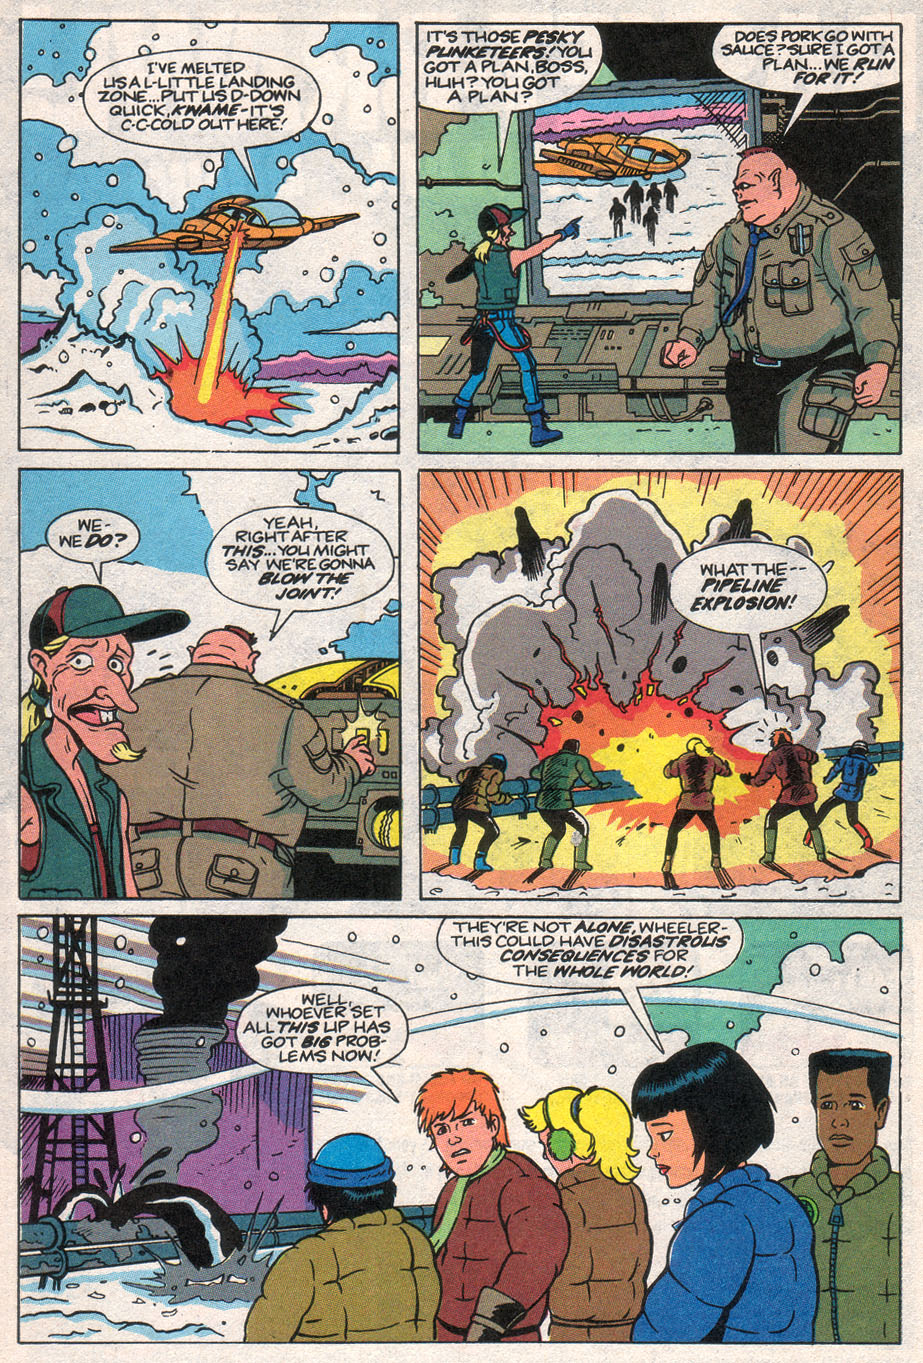 Captain Planet and the Planeteers 10 Page 19